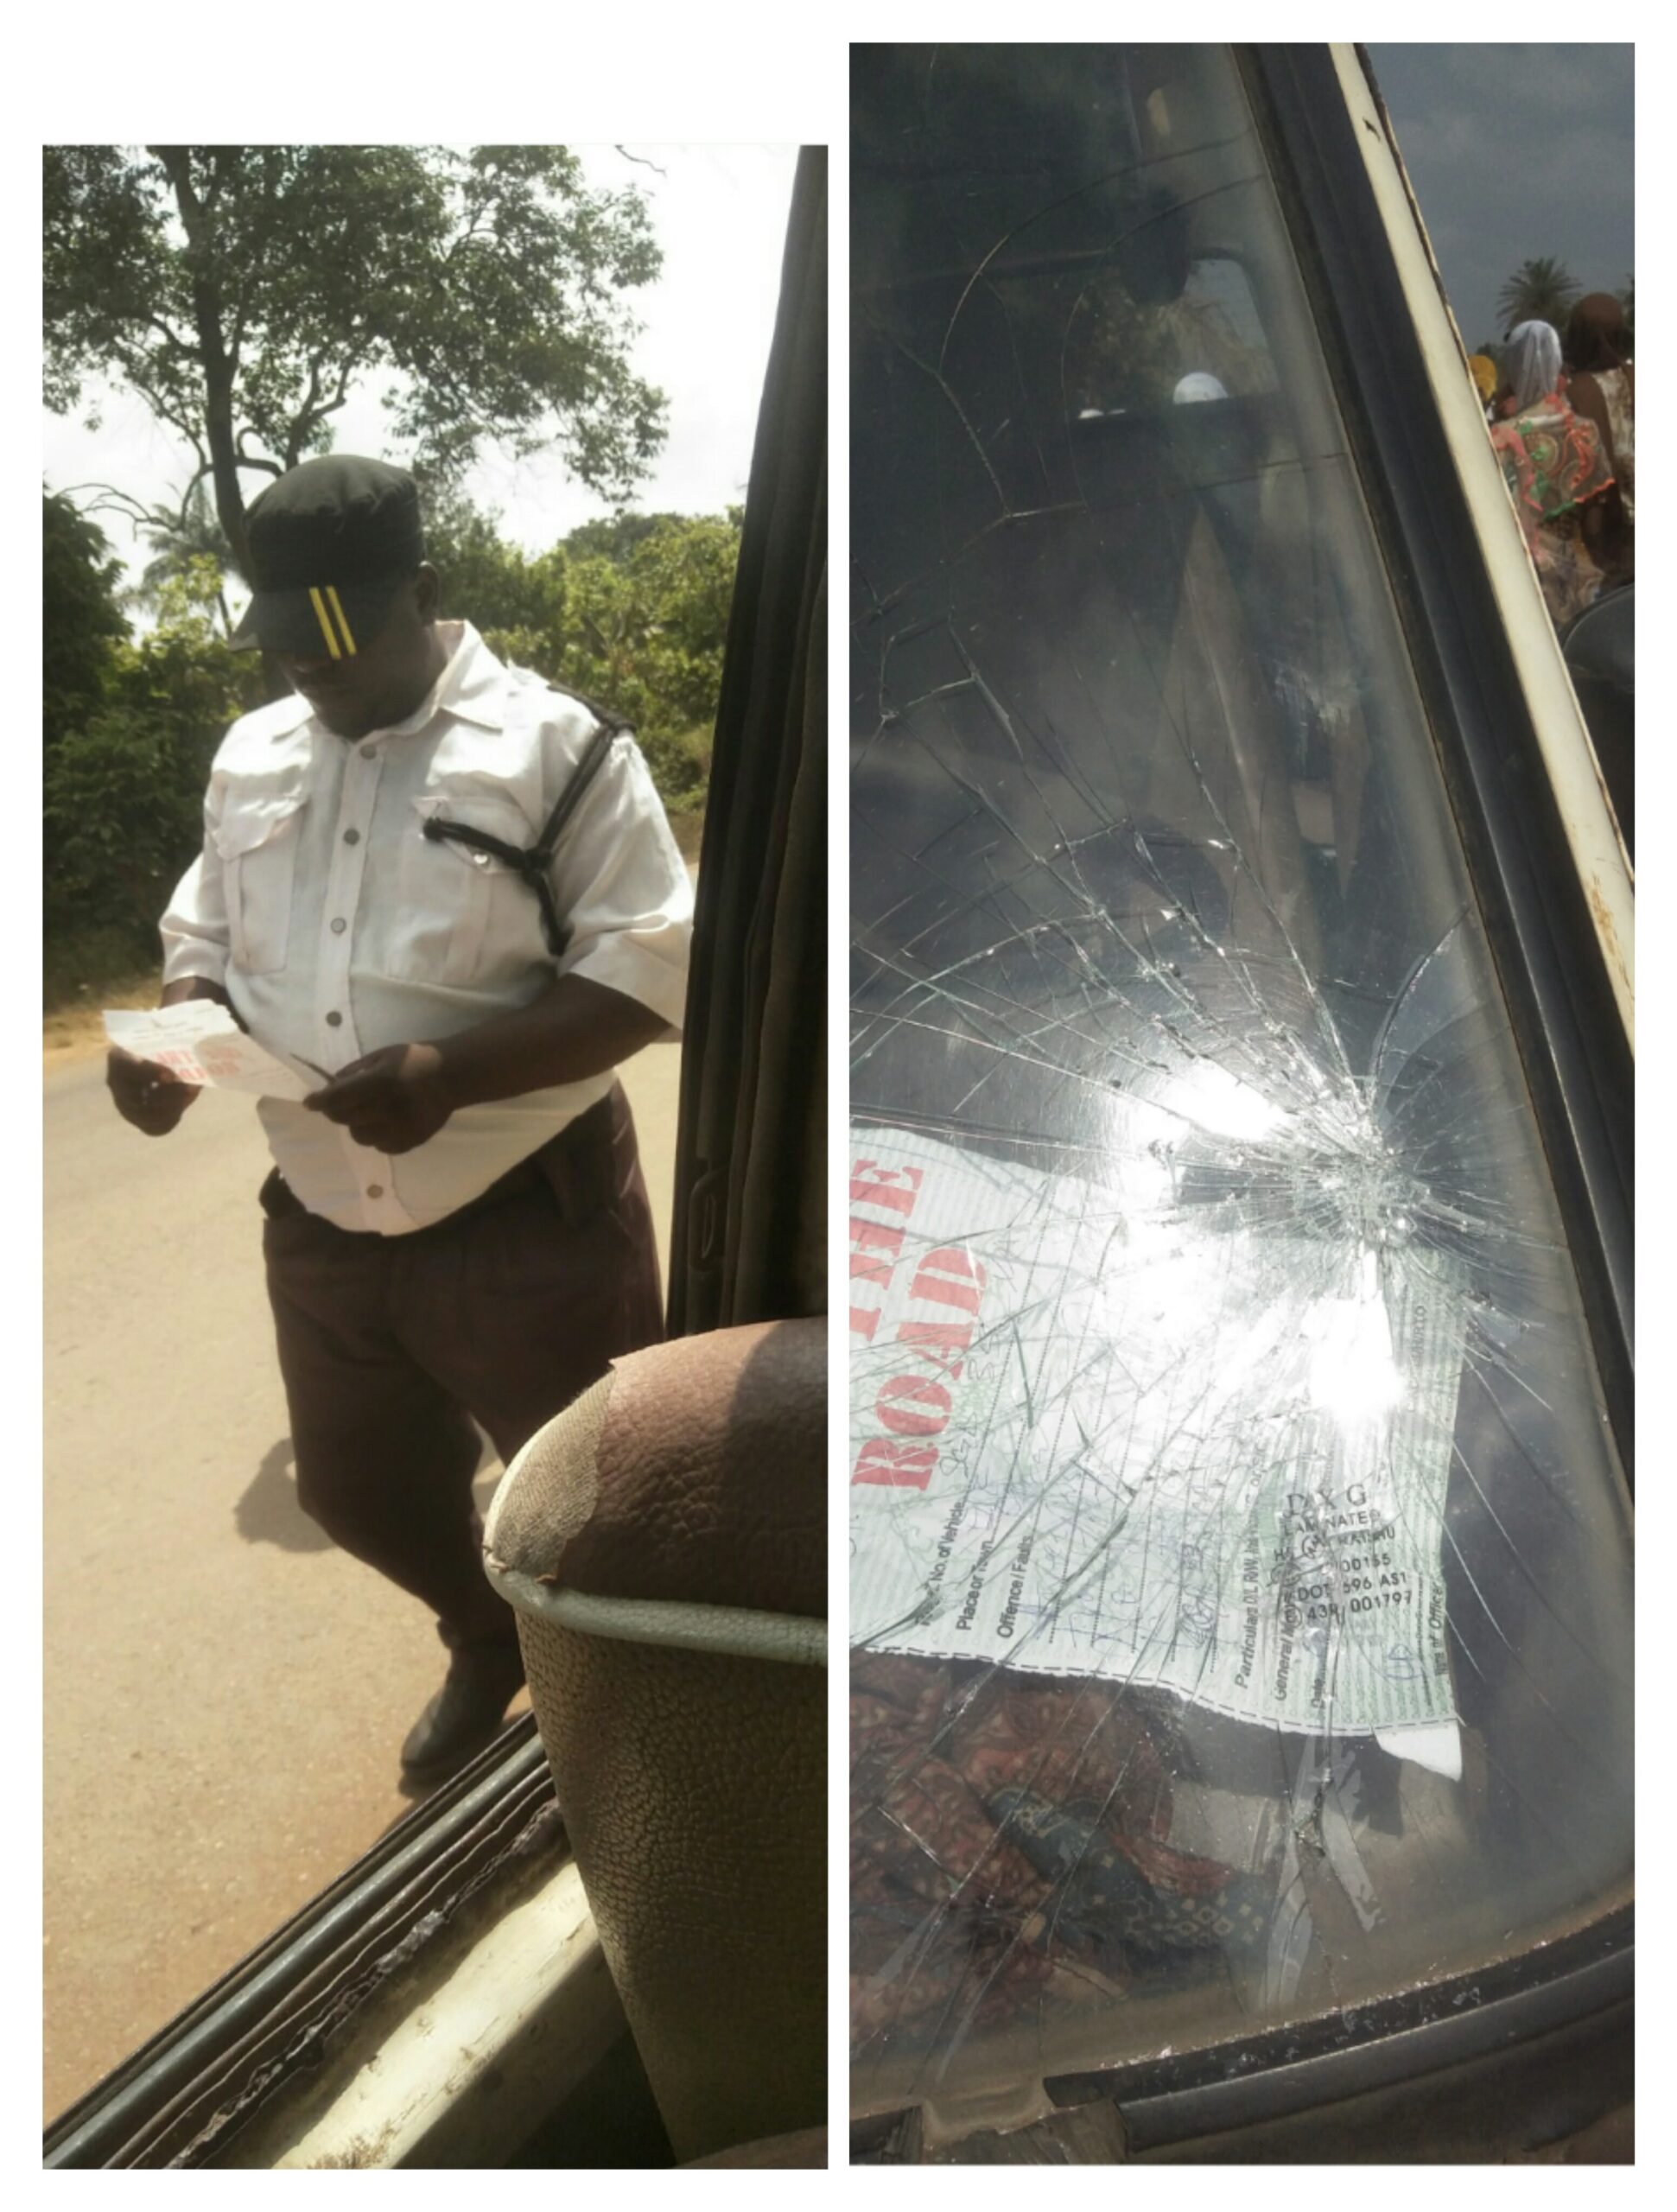 Video: VIO Officer Breaks Bus Screen, Harasses Driver, Passagers After Taking Bribe